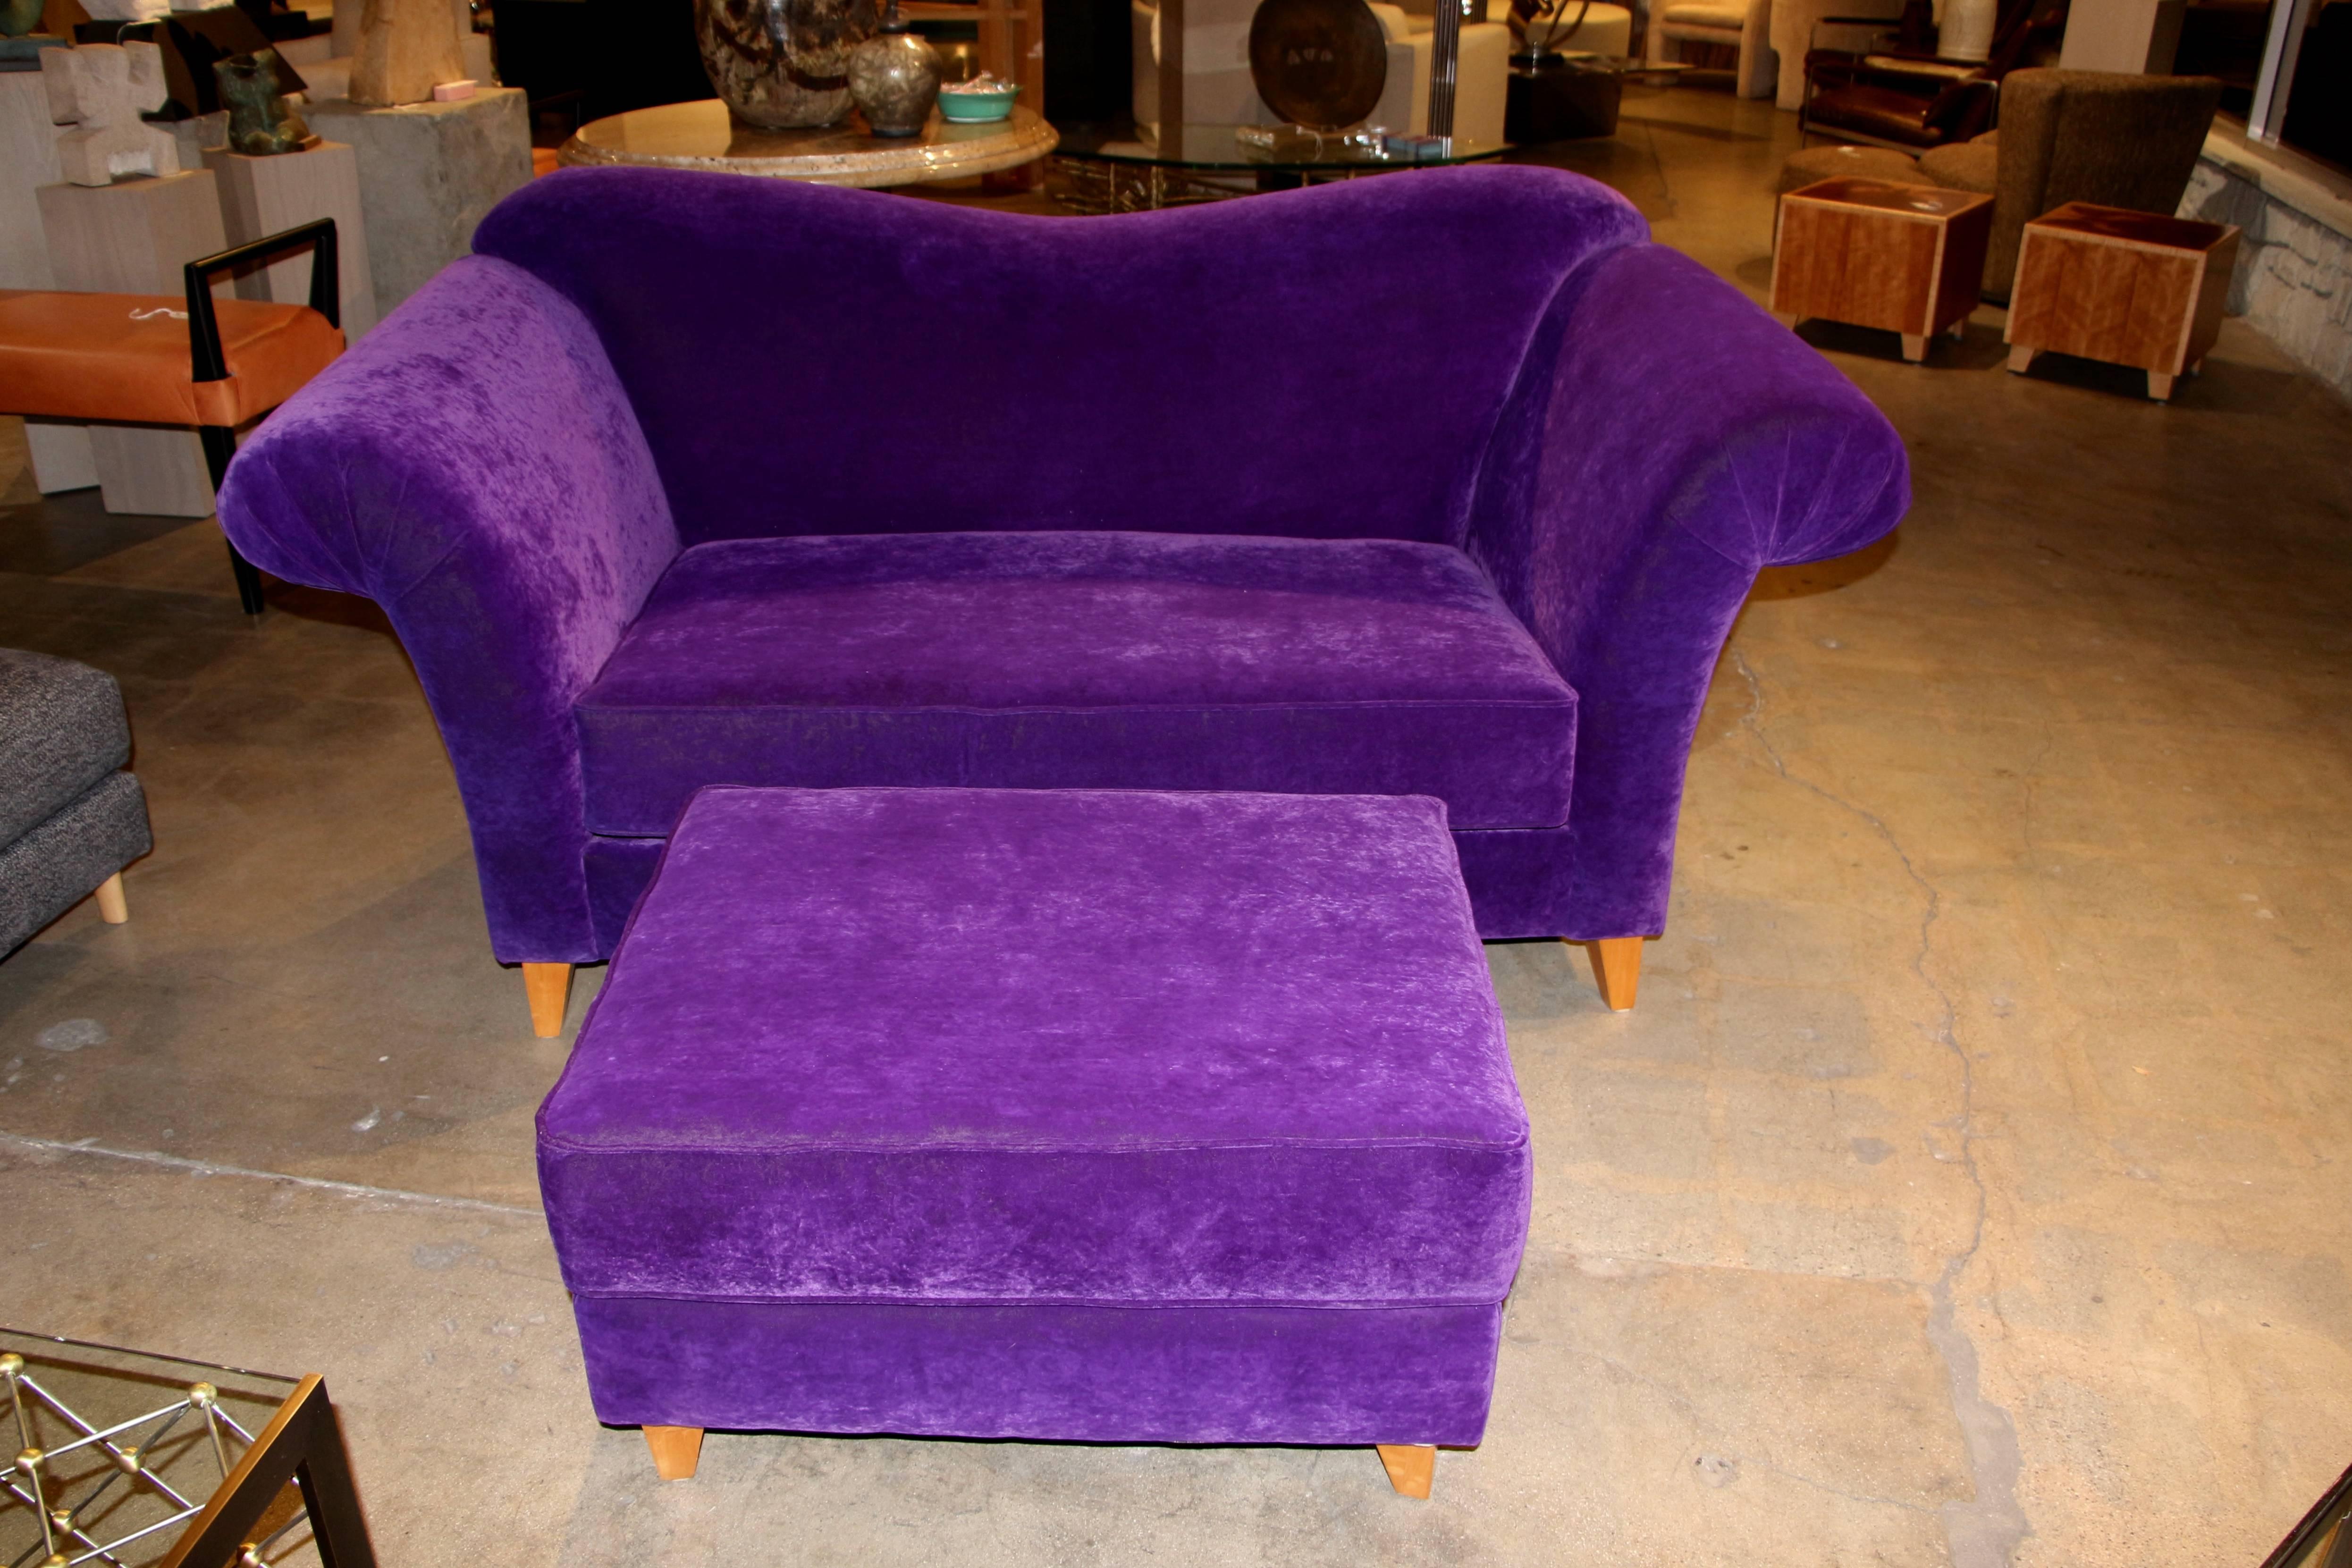 A nice purple Loveseat or settee with matching ottoman. Not sure what the fabric is made of but it feels like a mohair blend. Great vivid purple color, the legs rotate and need to be aligned, as they can’t at an angle. There are some losses and